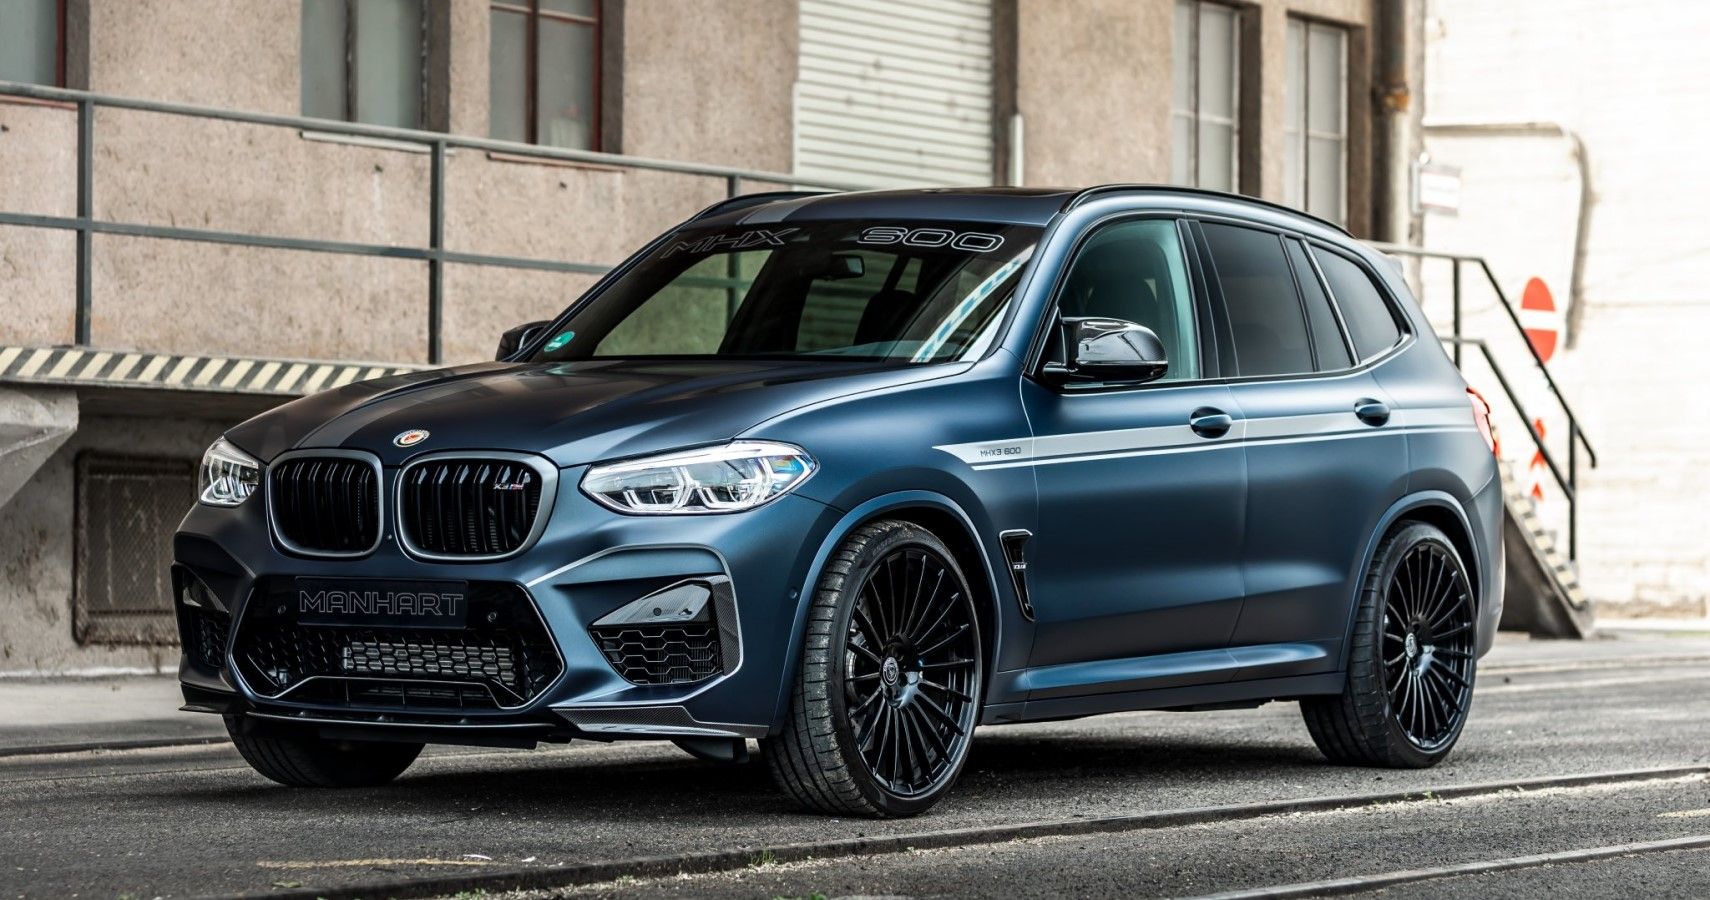 Manhart MXH3 600 Is A 626 HP BMW X3 M That Wants To Slay Everything